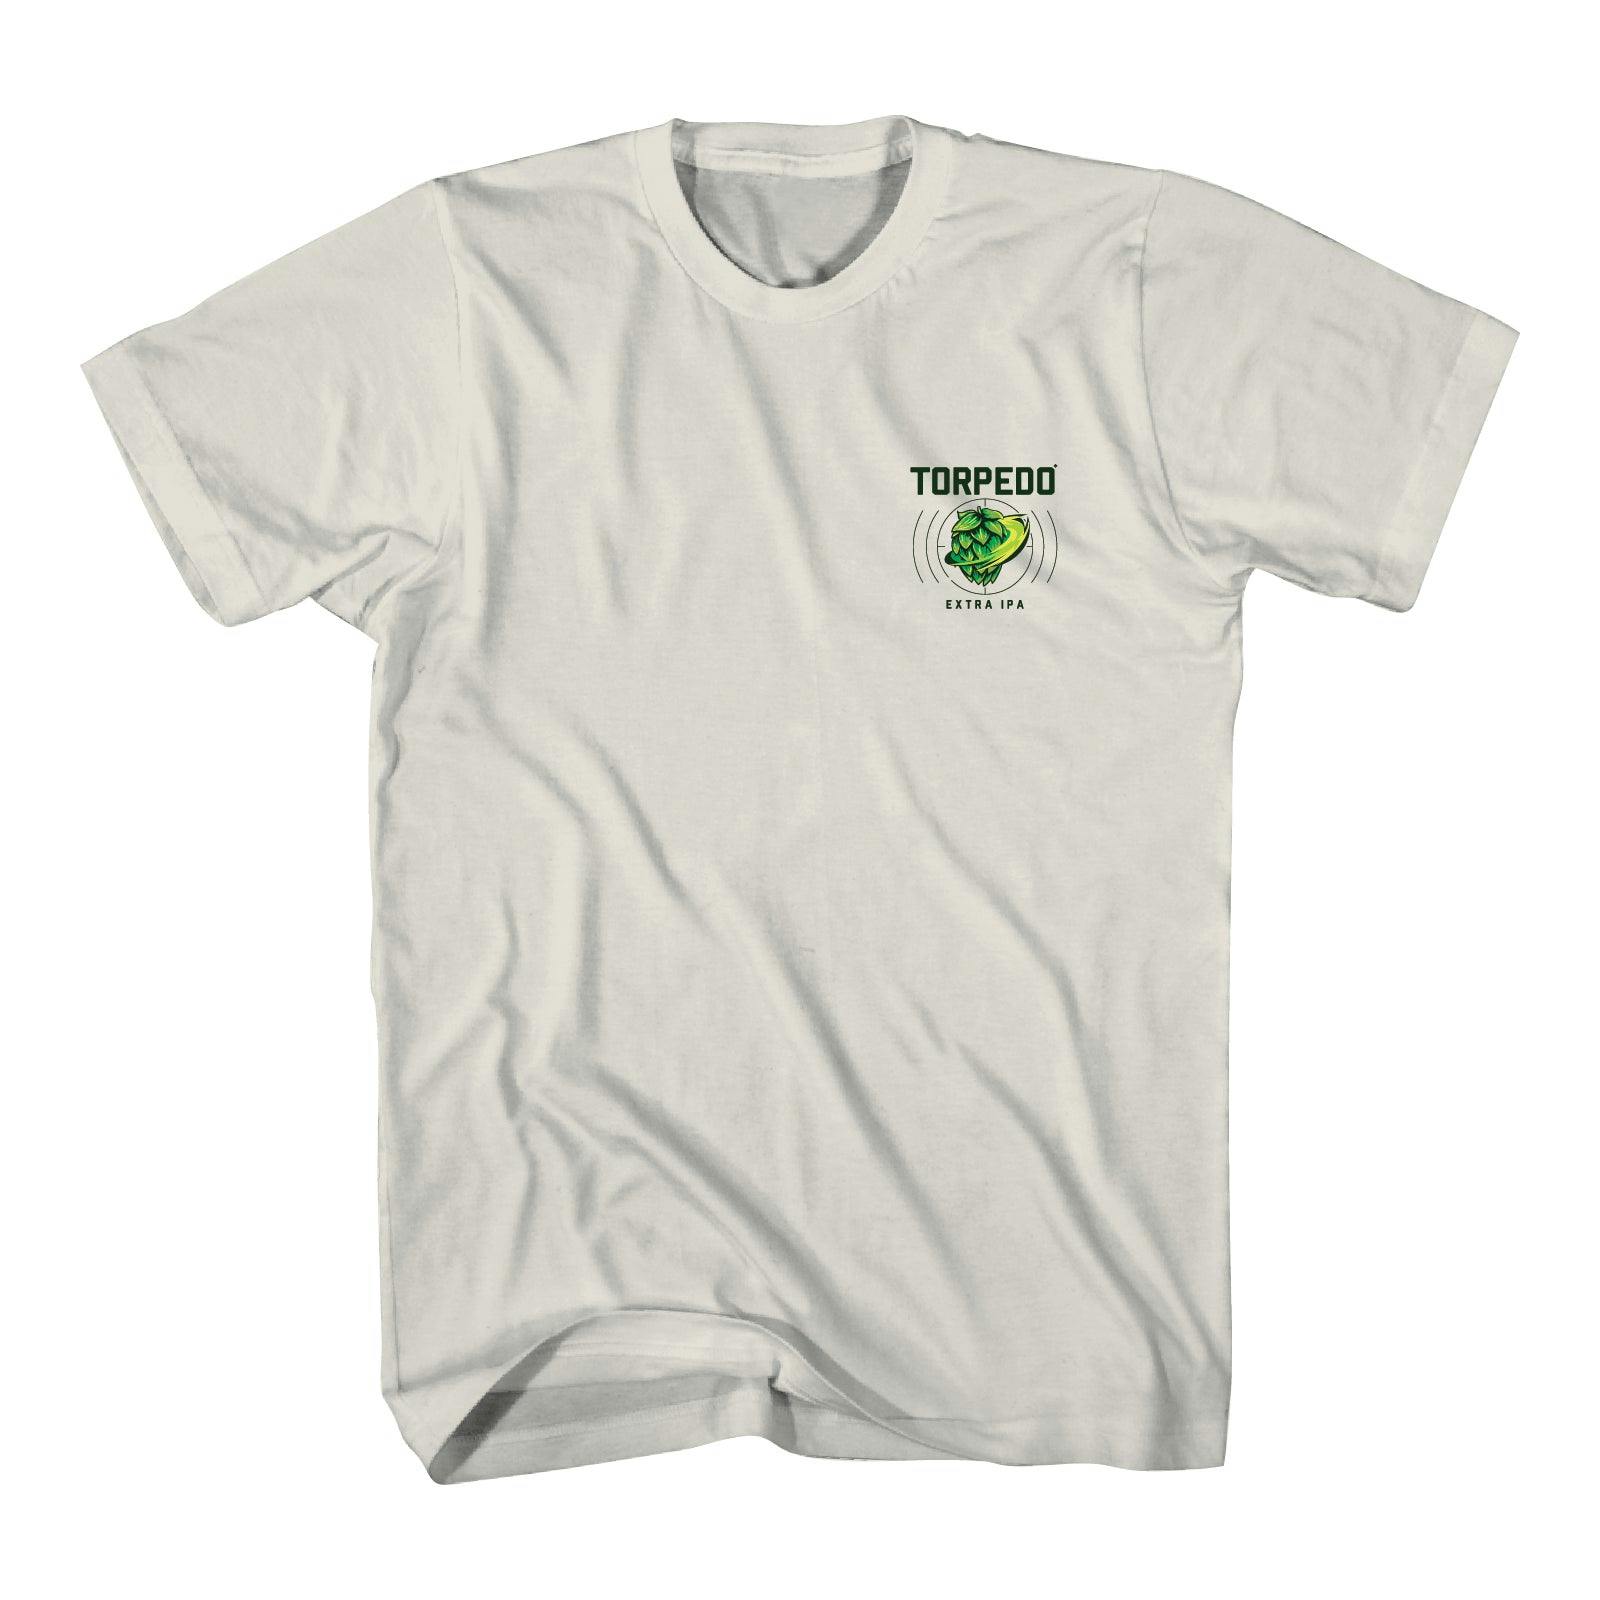 Sierra Nevada Brewing Co. Torpedo Extra IPA T-Shirt - front view